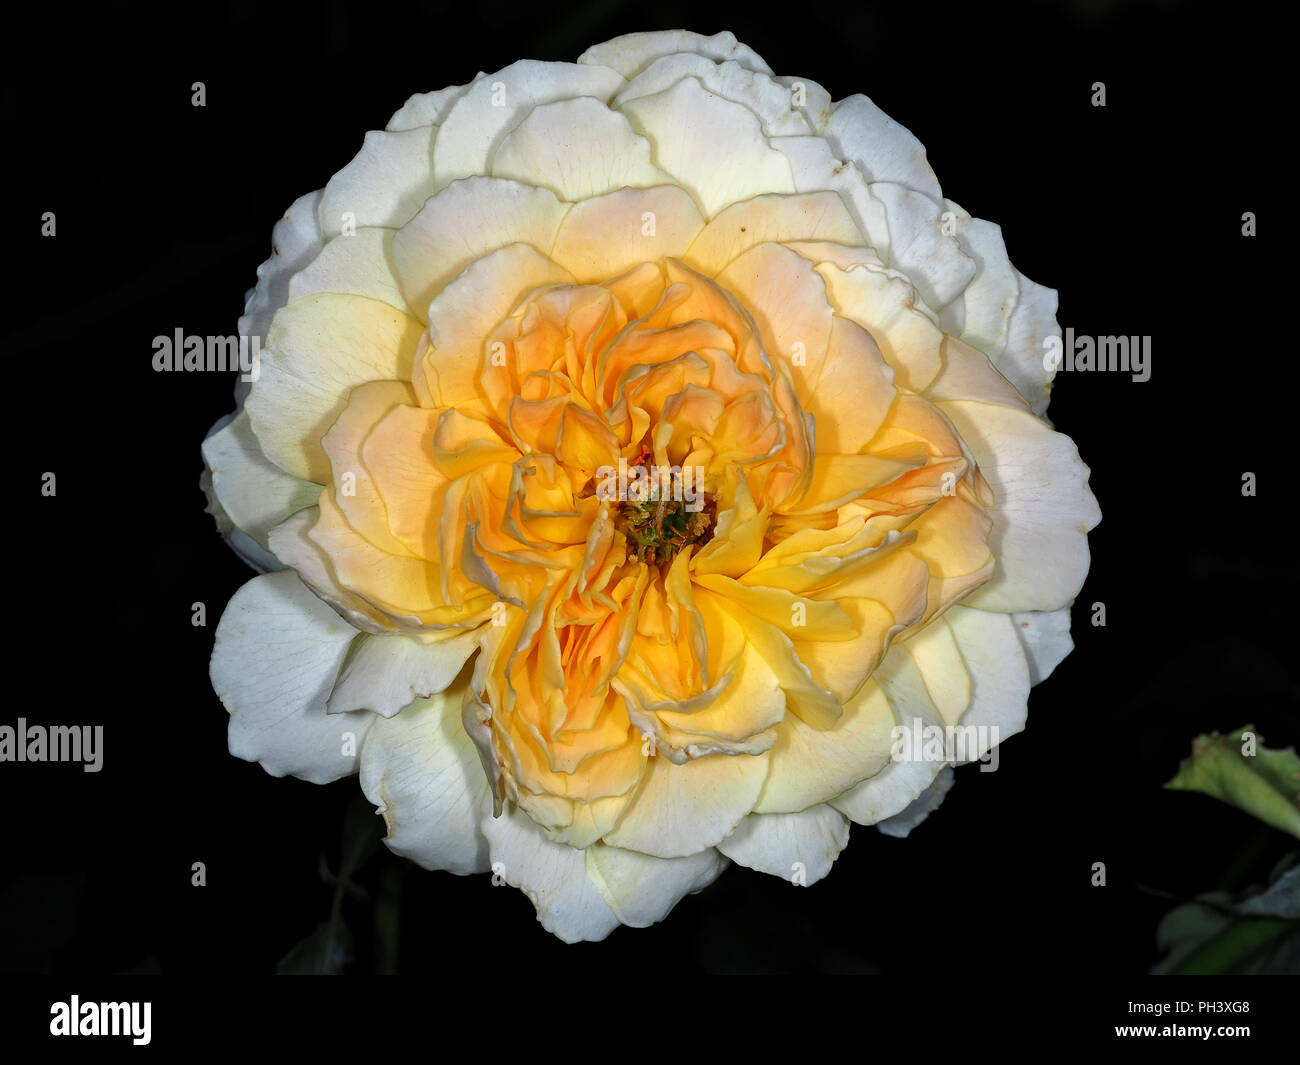 Molineux rose flower close-up Stock Photo